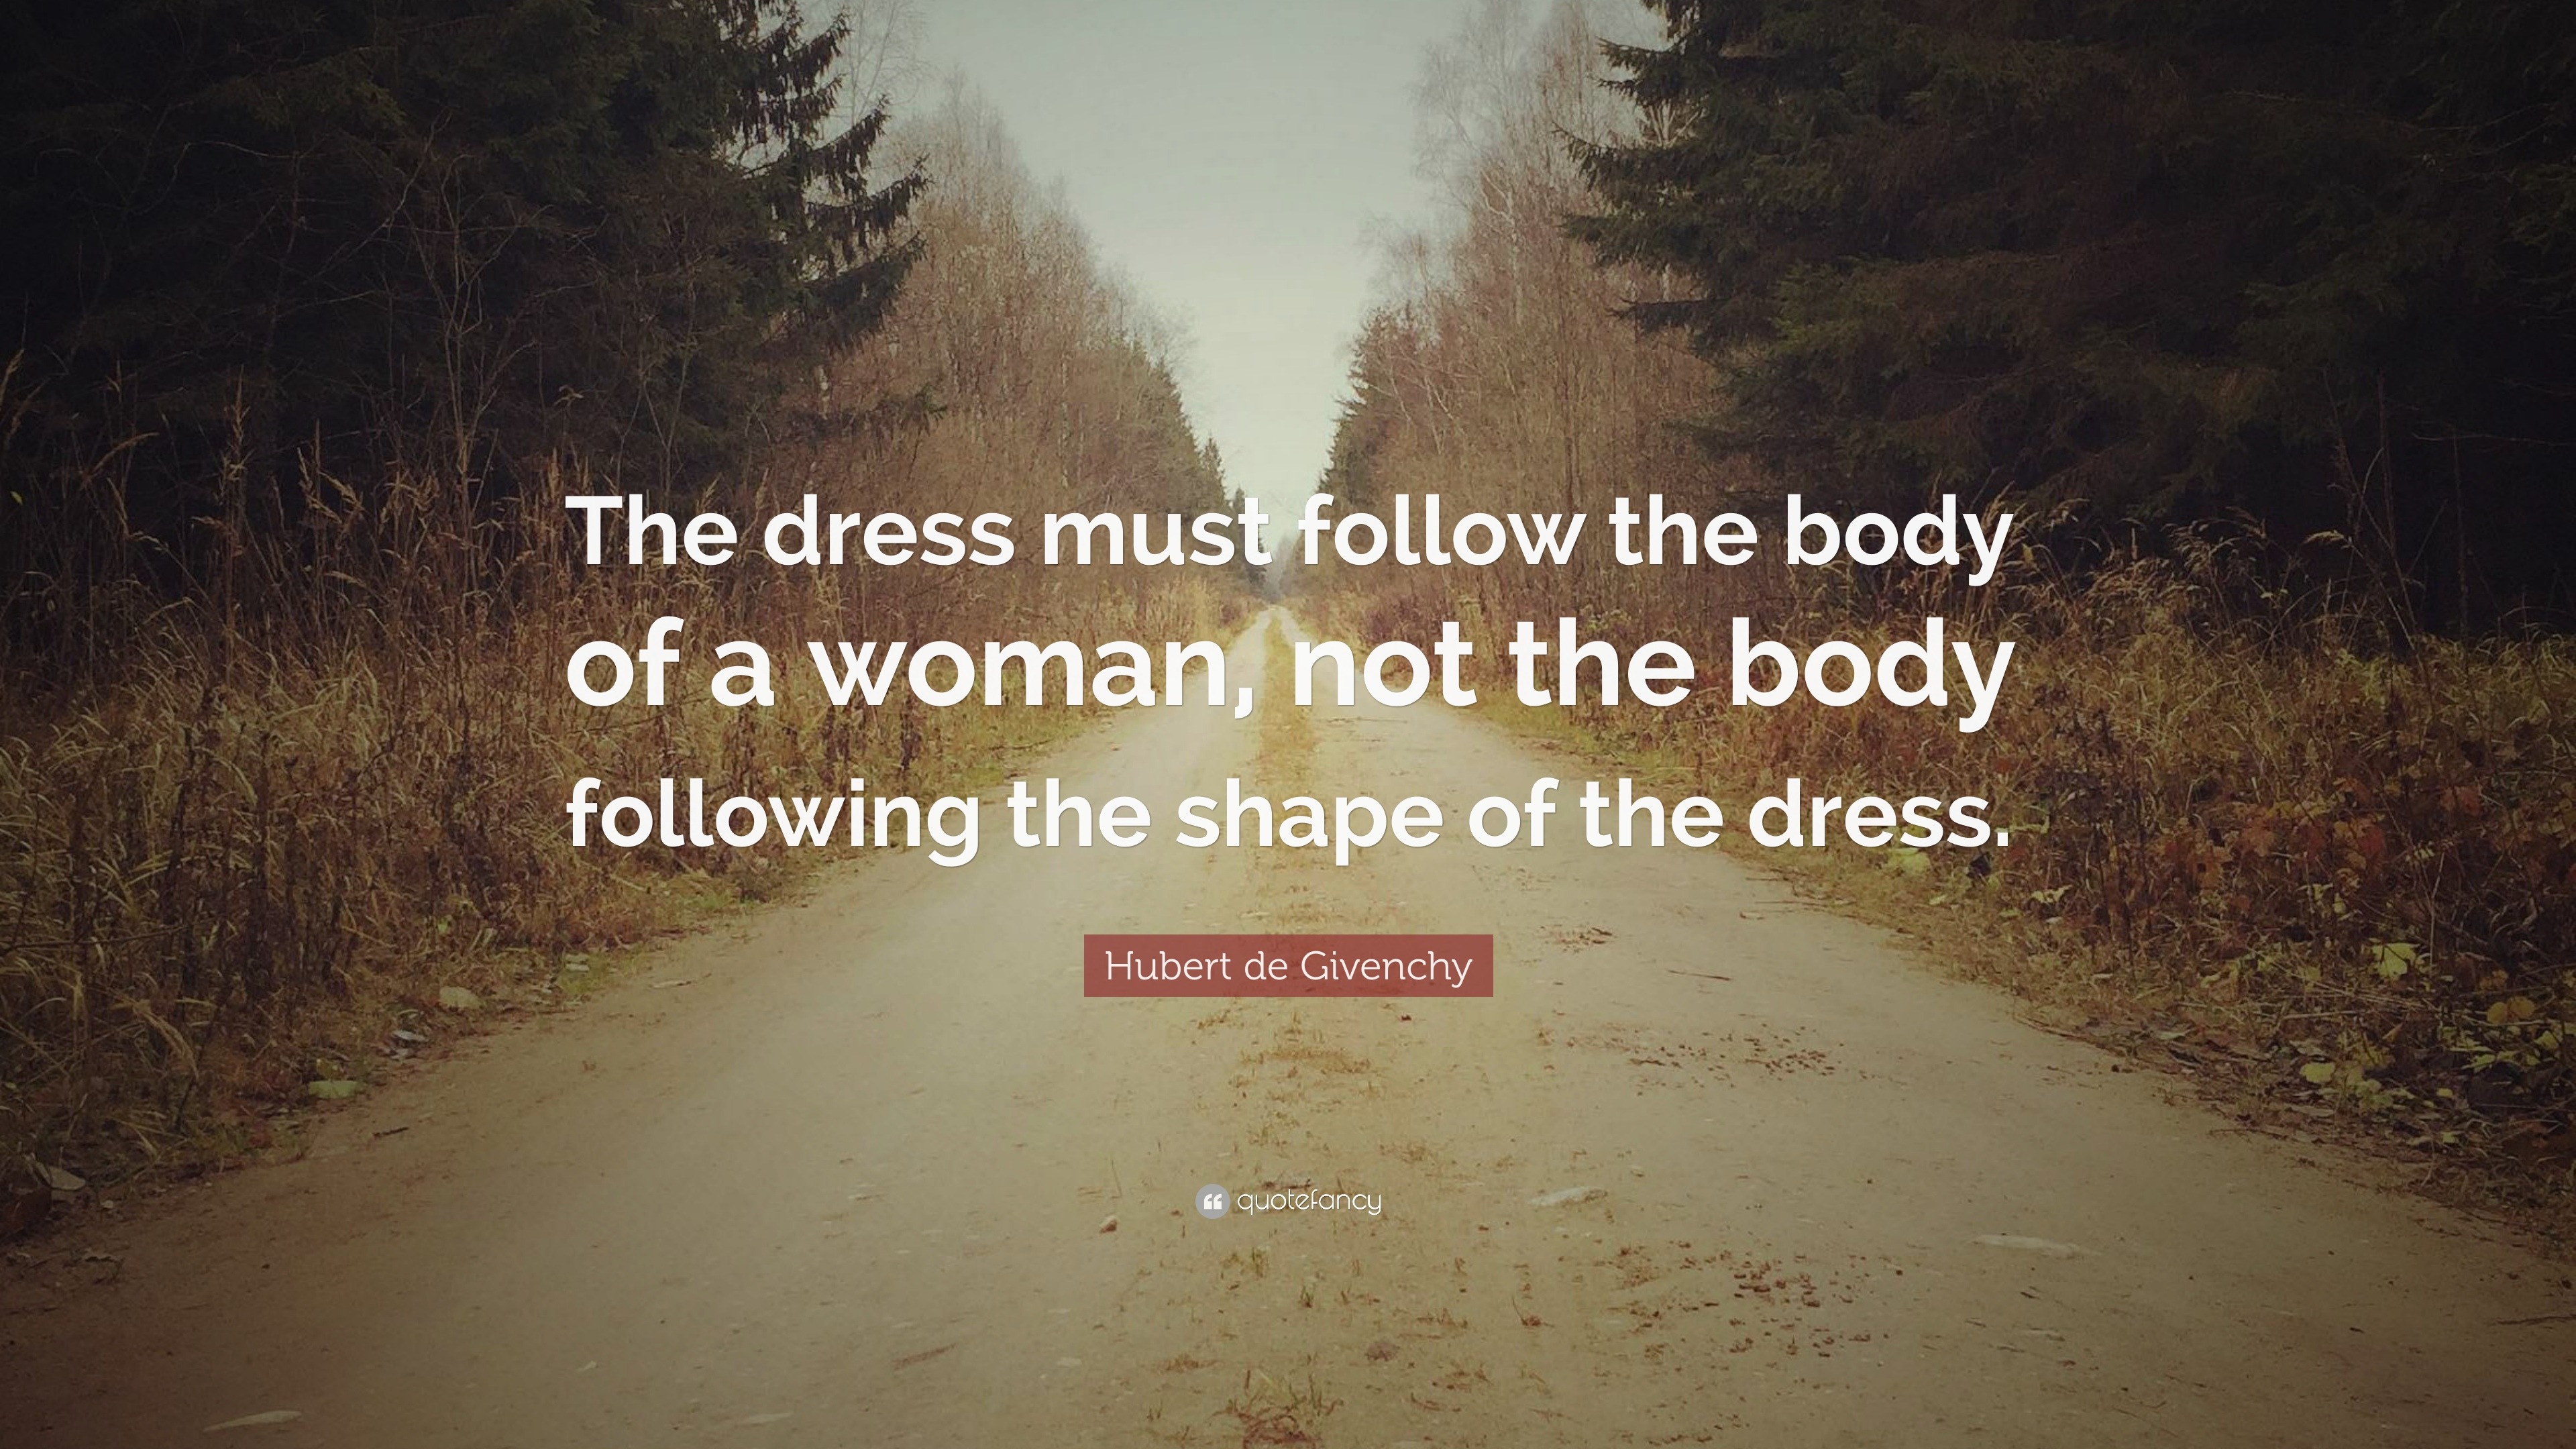 Hubert de Givenchy Quote: “The dress must follow the body of a woman, not  the body